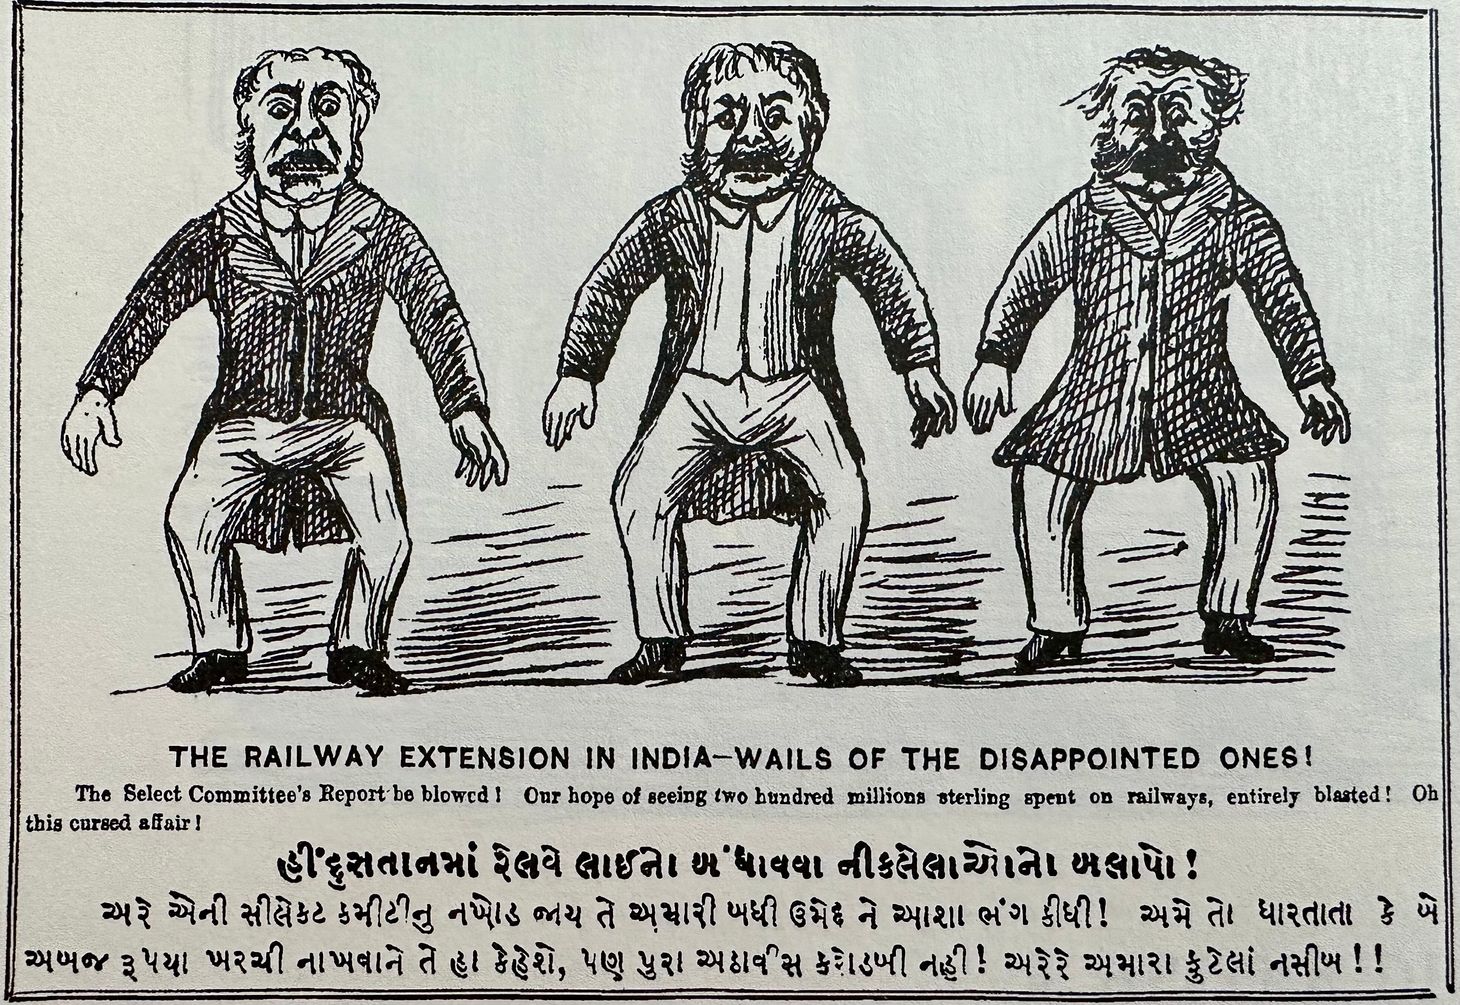 “British boxing versus Indian fisticuffs”: South Asia in the Era of New Imperialism, c.1860 - c.1940